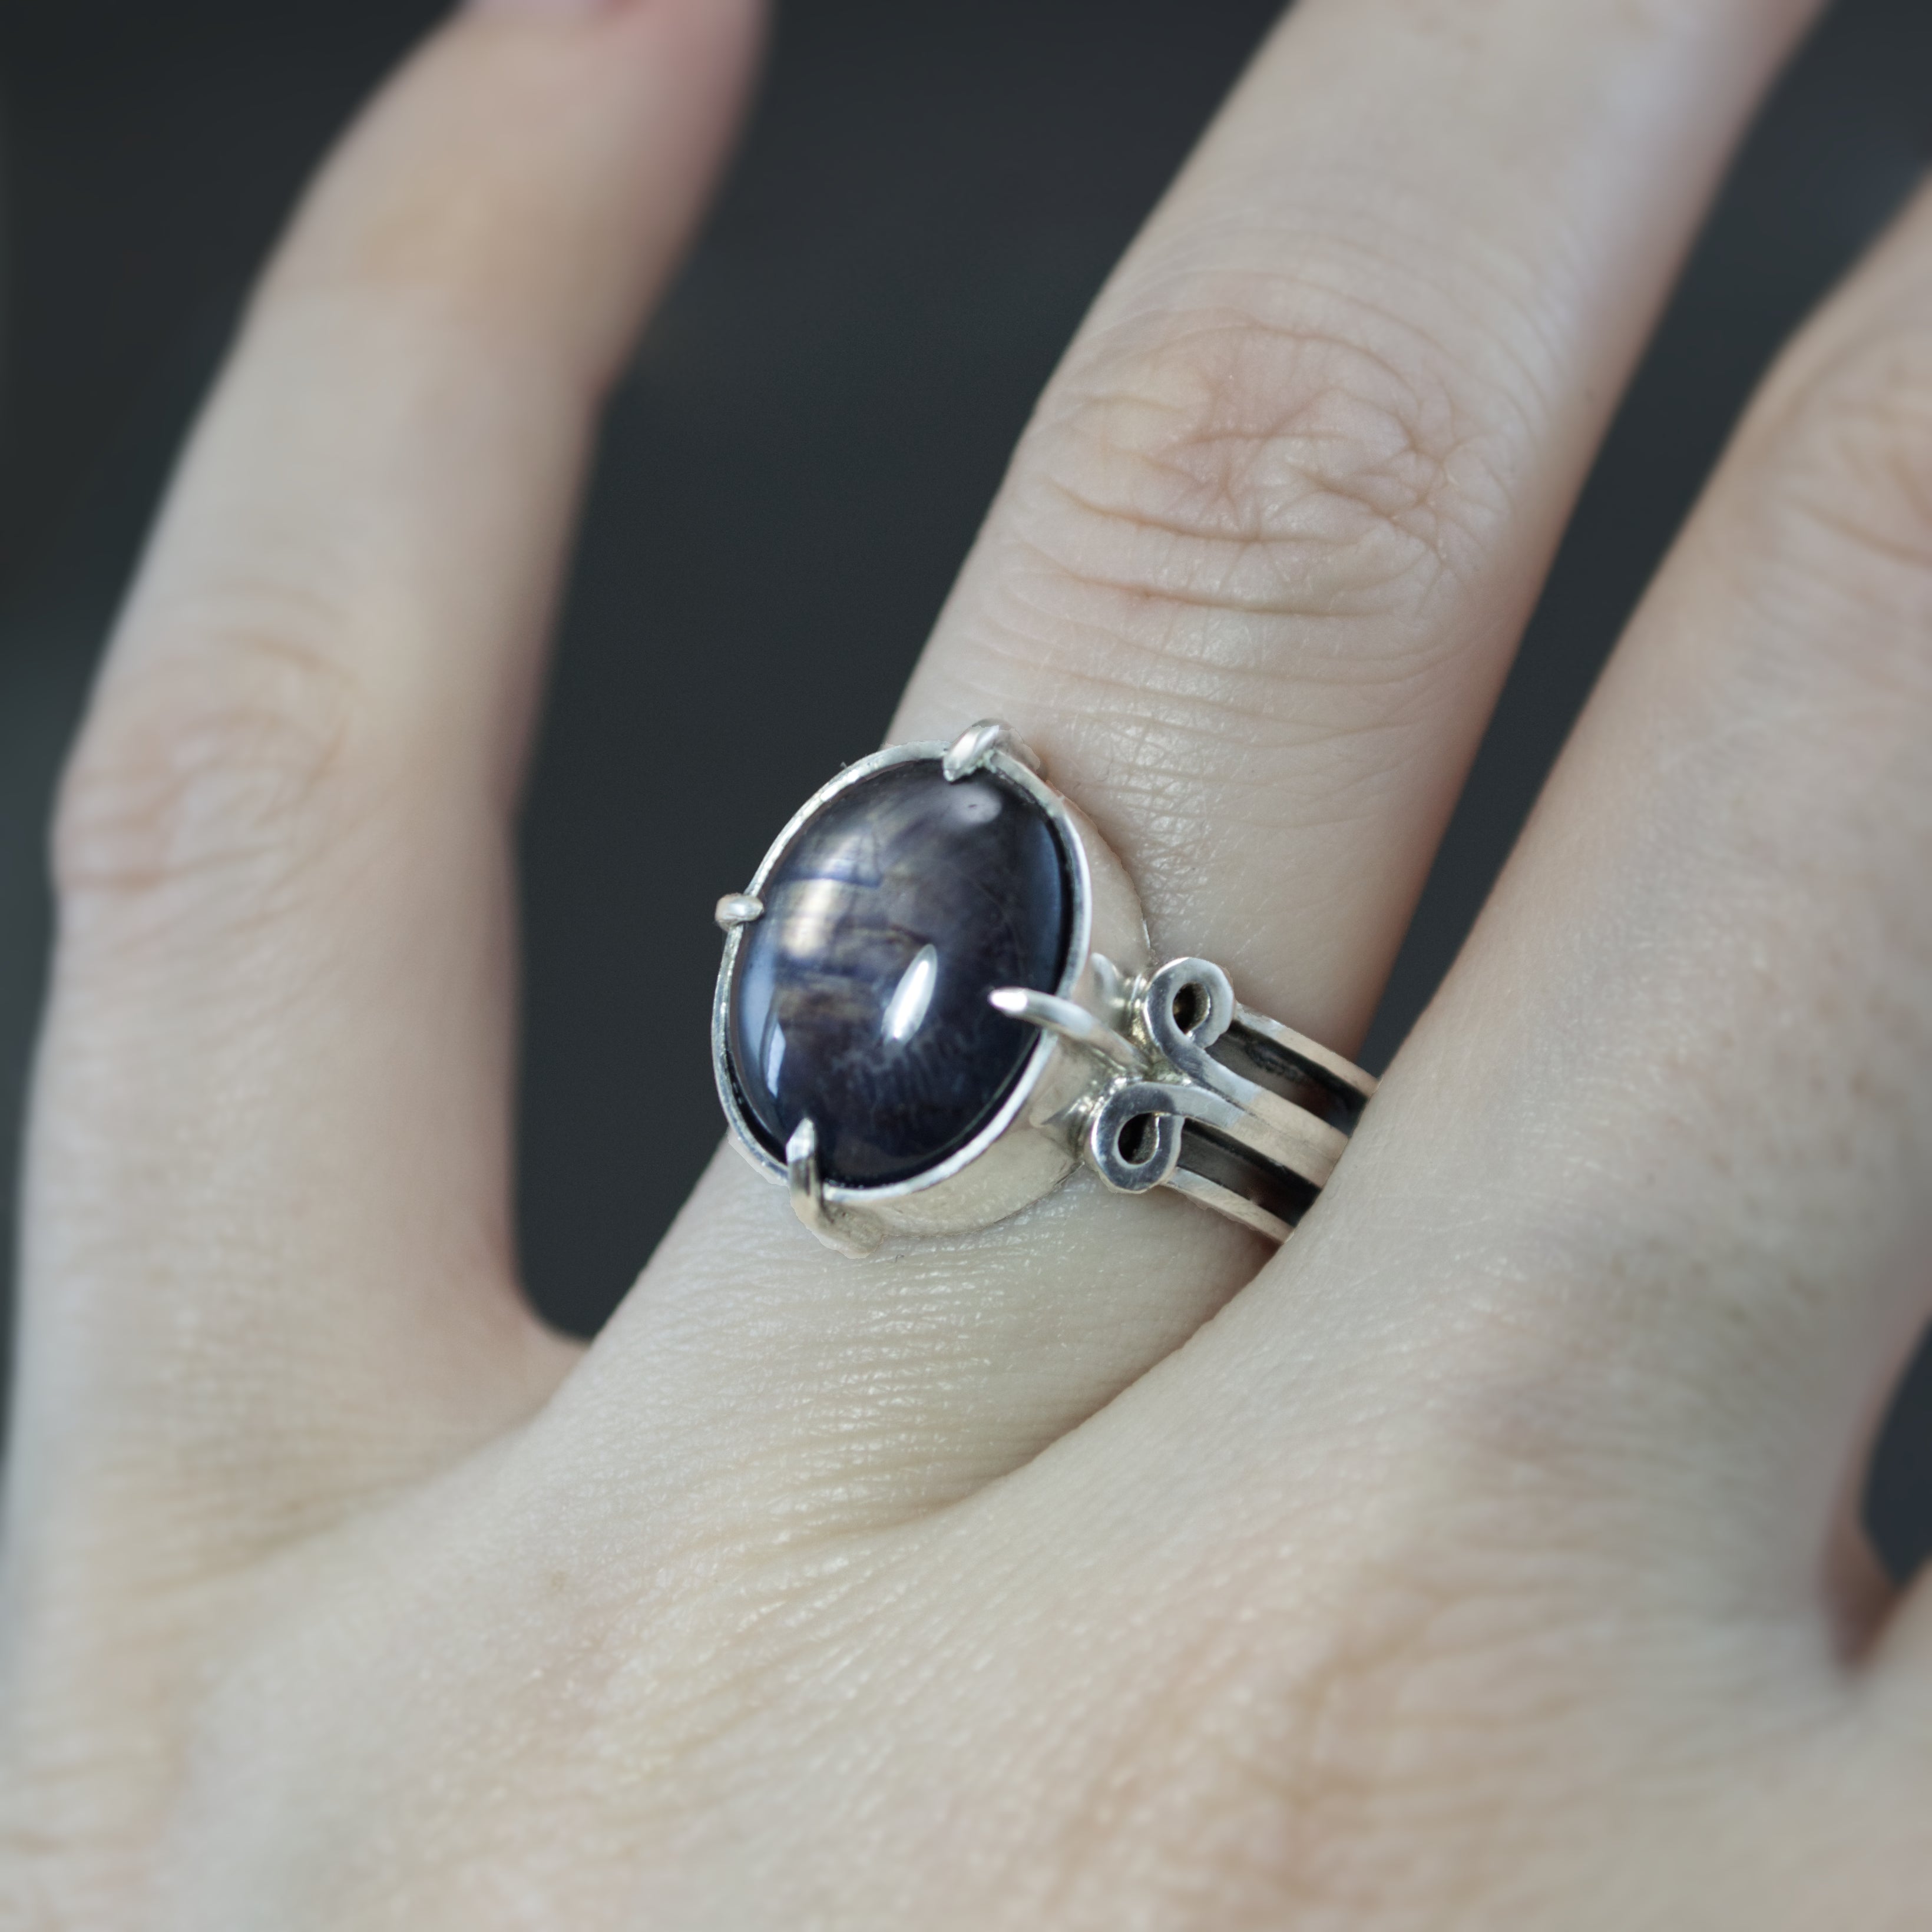 Star Sapphire Scroll Ring - Size 7